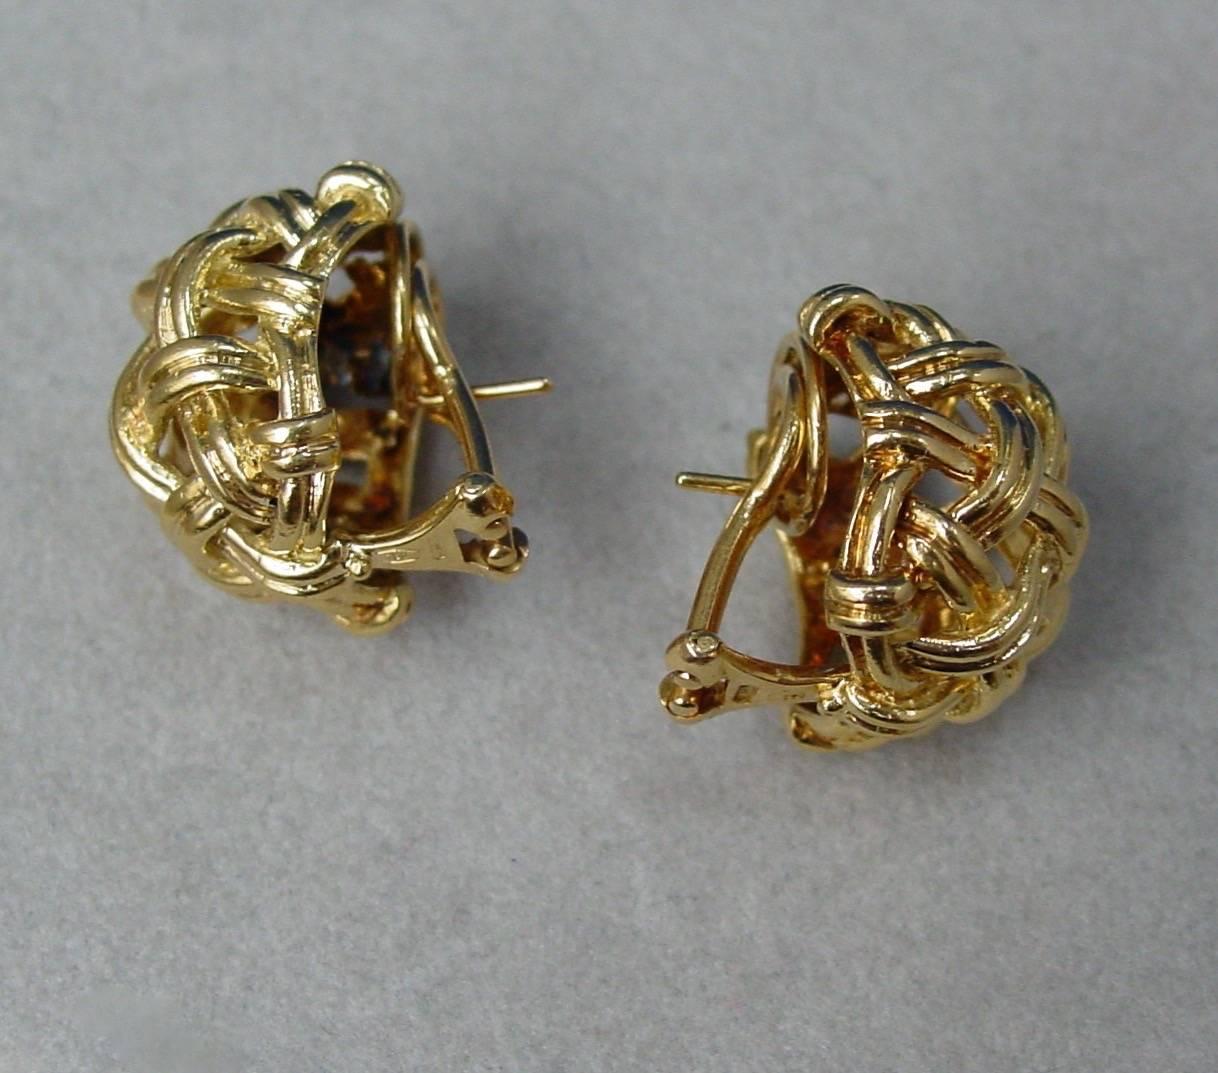 A classic pair of 18 karat gold basket weave earrings. Measuring approximately 3/4 inches square and 1/2 inch deep these very nicely made earrings make a versatile addition to any wardrobe!